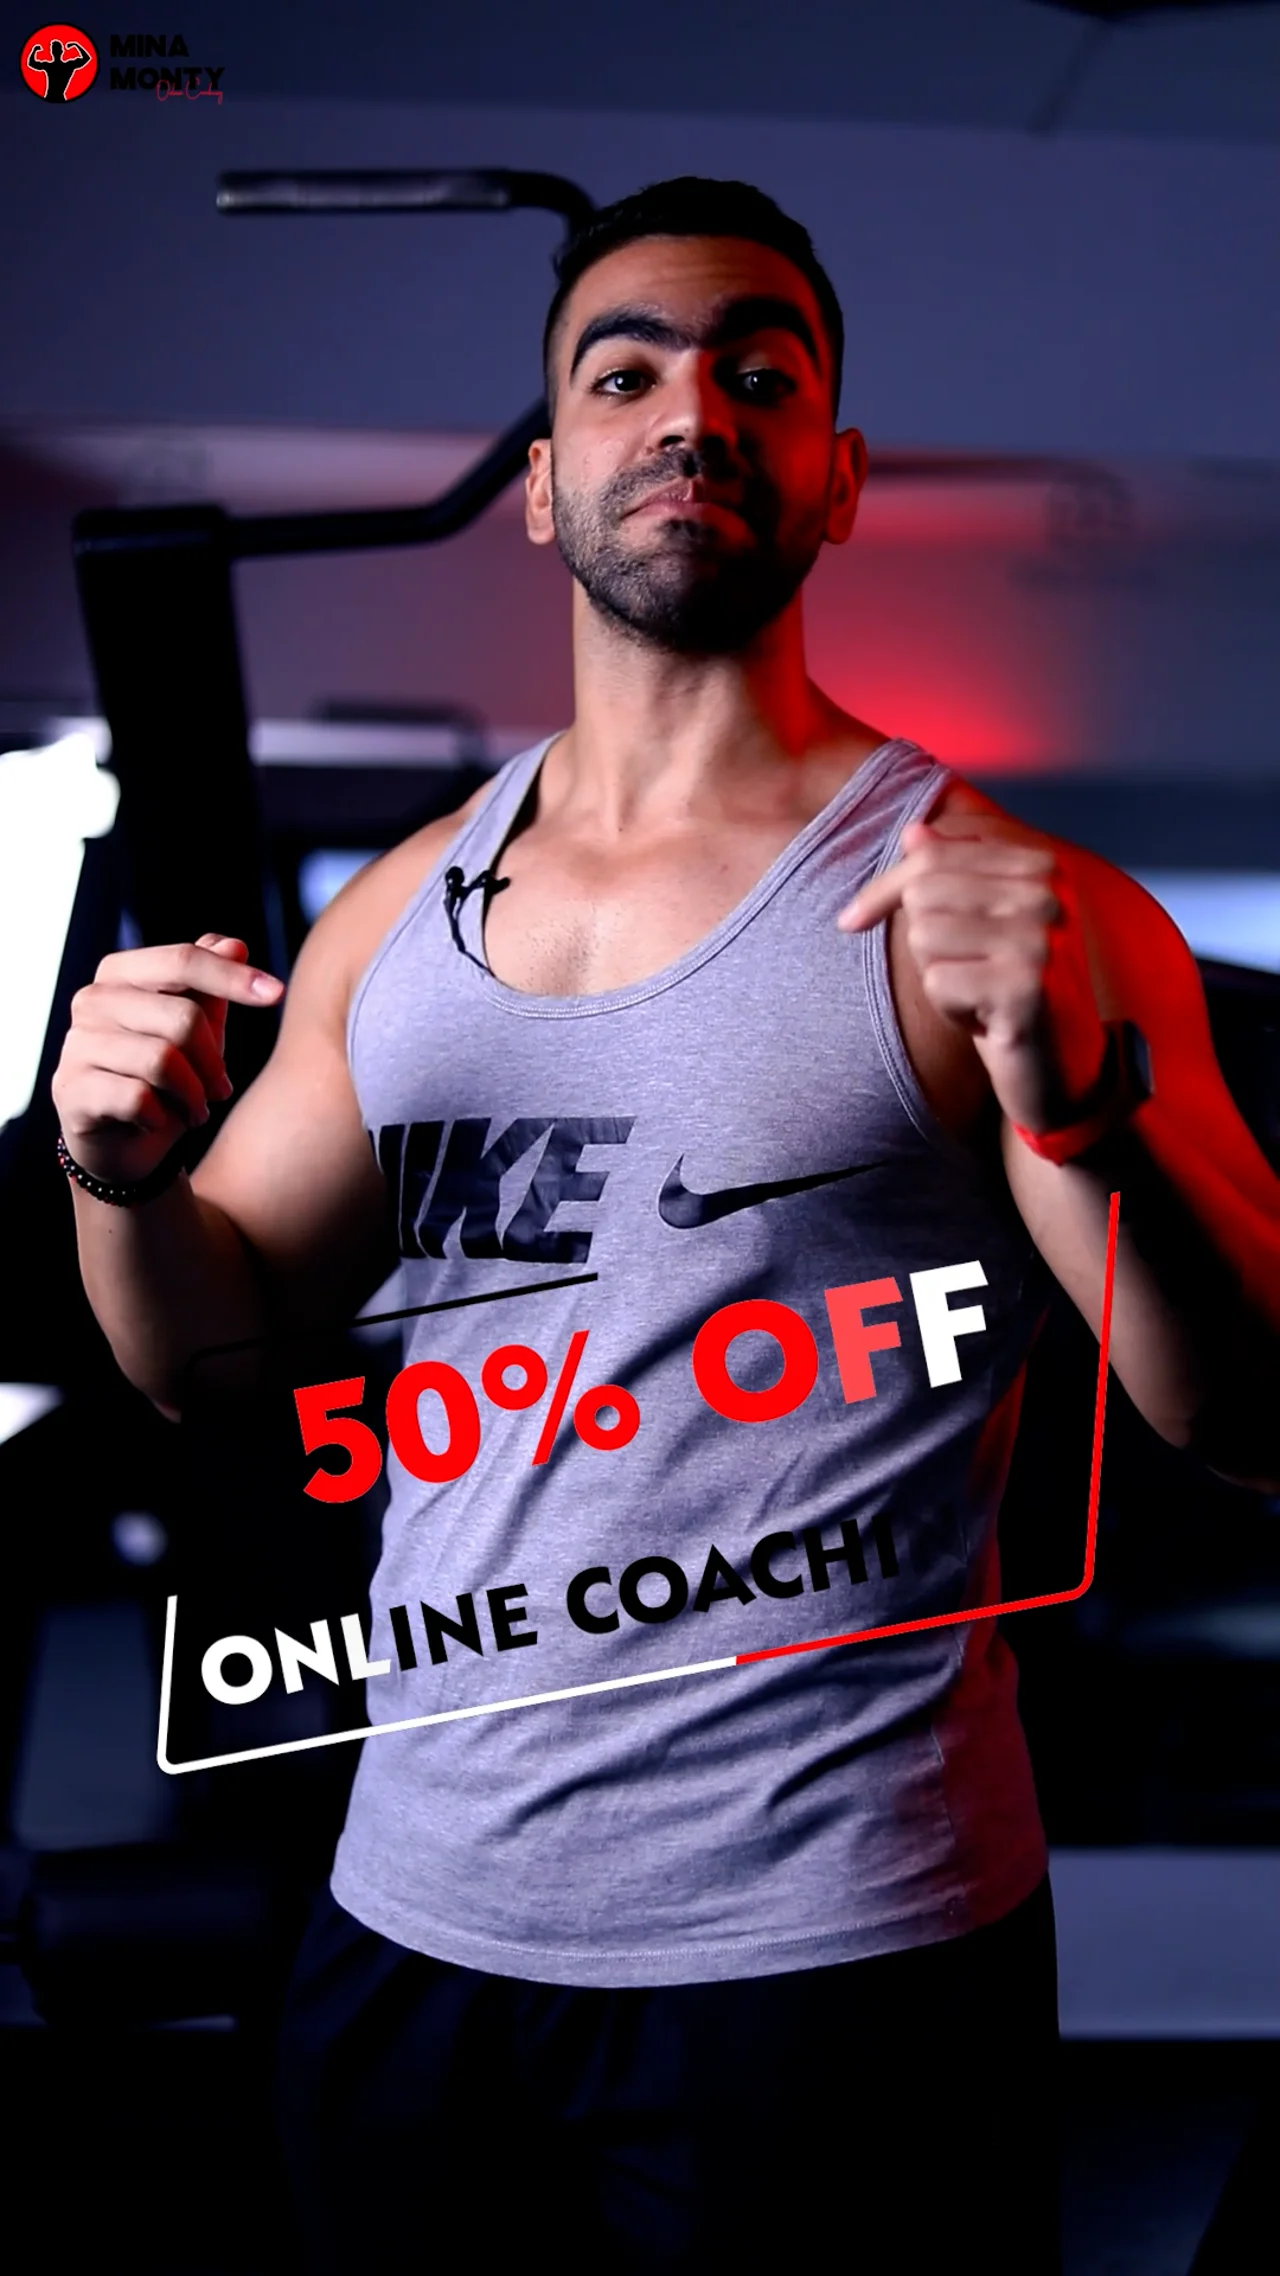 "Online Coaching Offer"